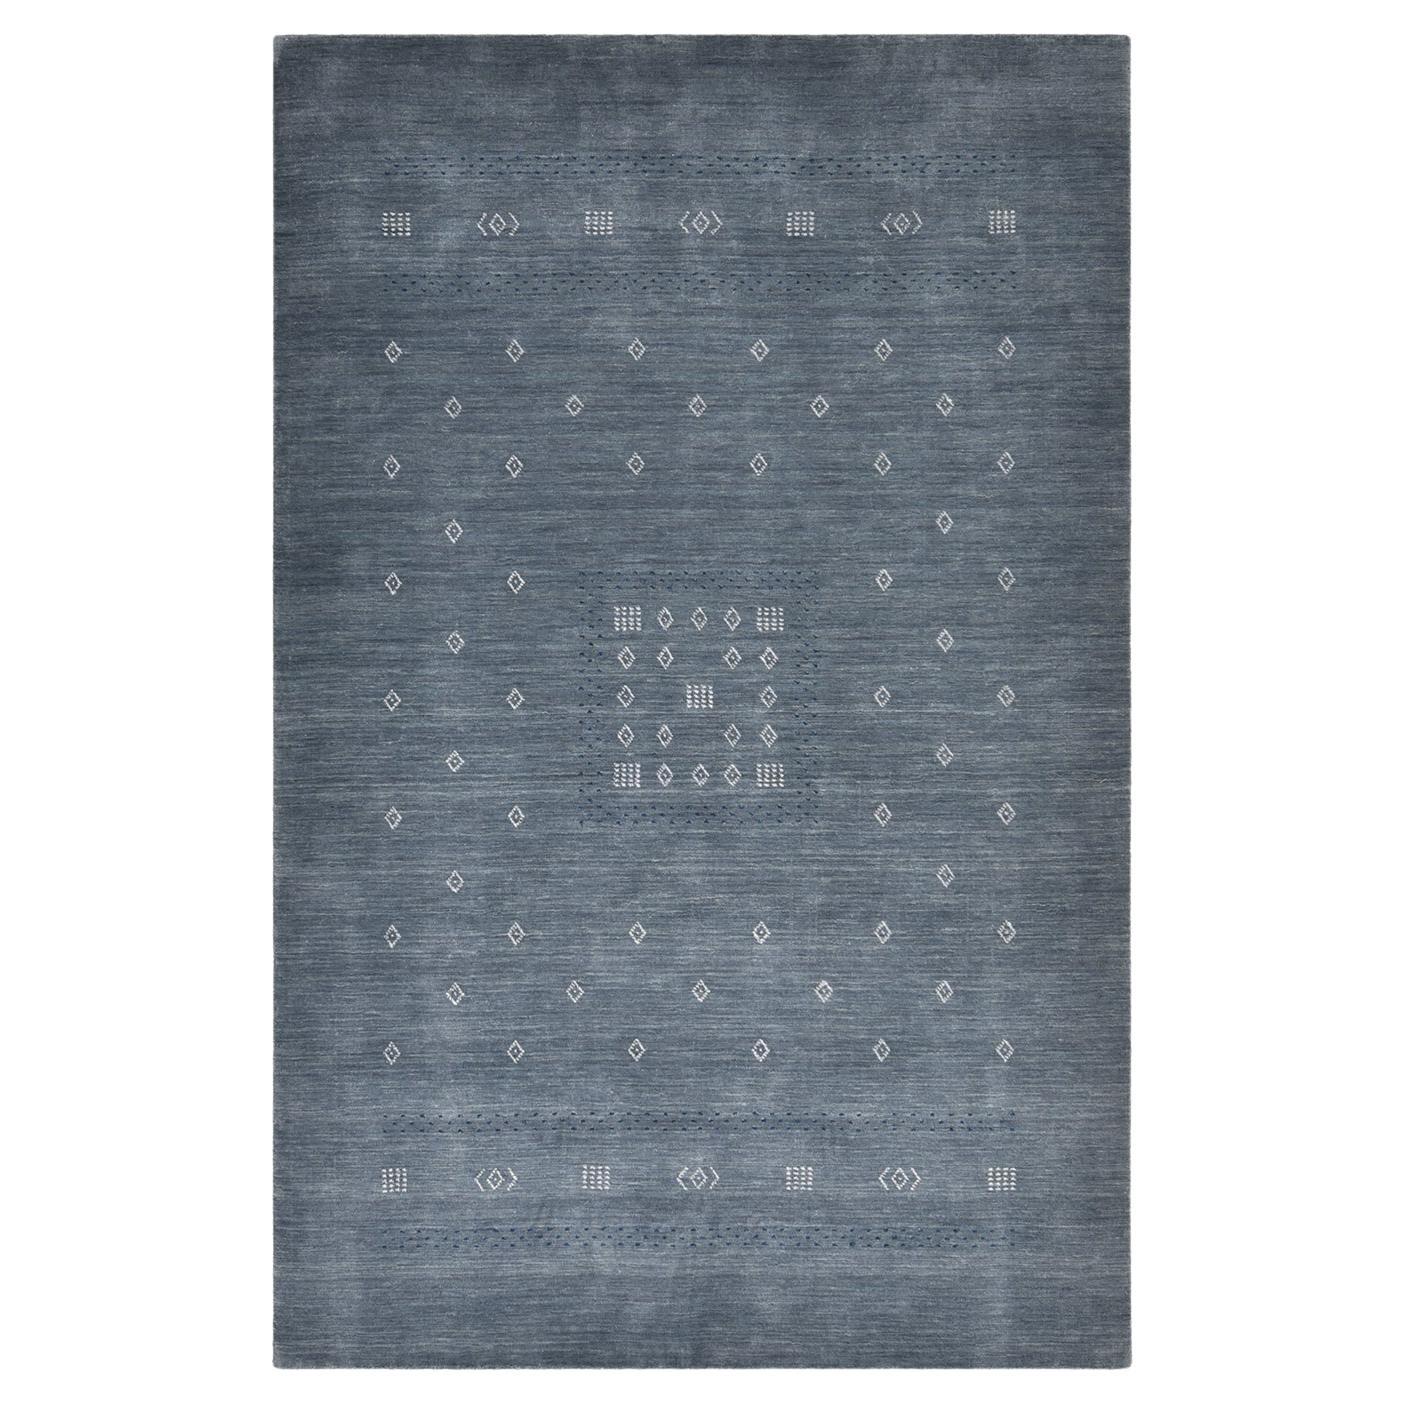 Solo Rugs Gabbeh Tribal Hand Loom Gray Area Rug For Sale